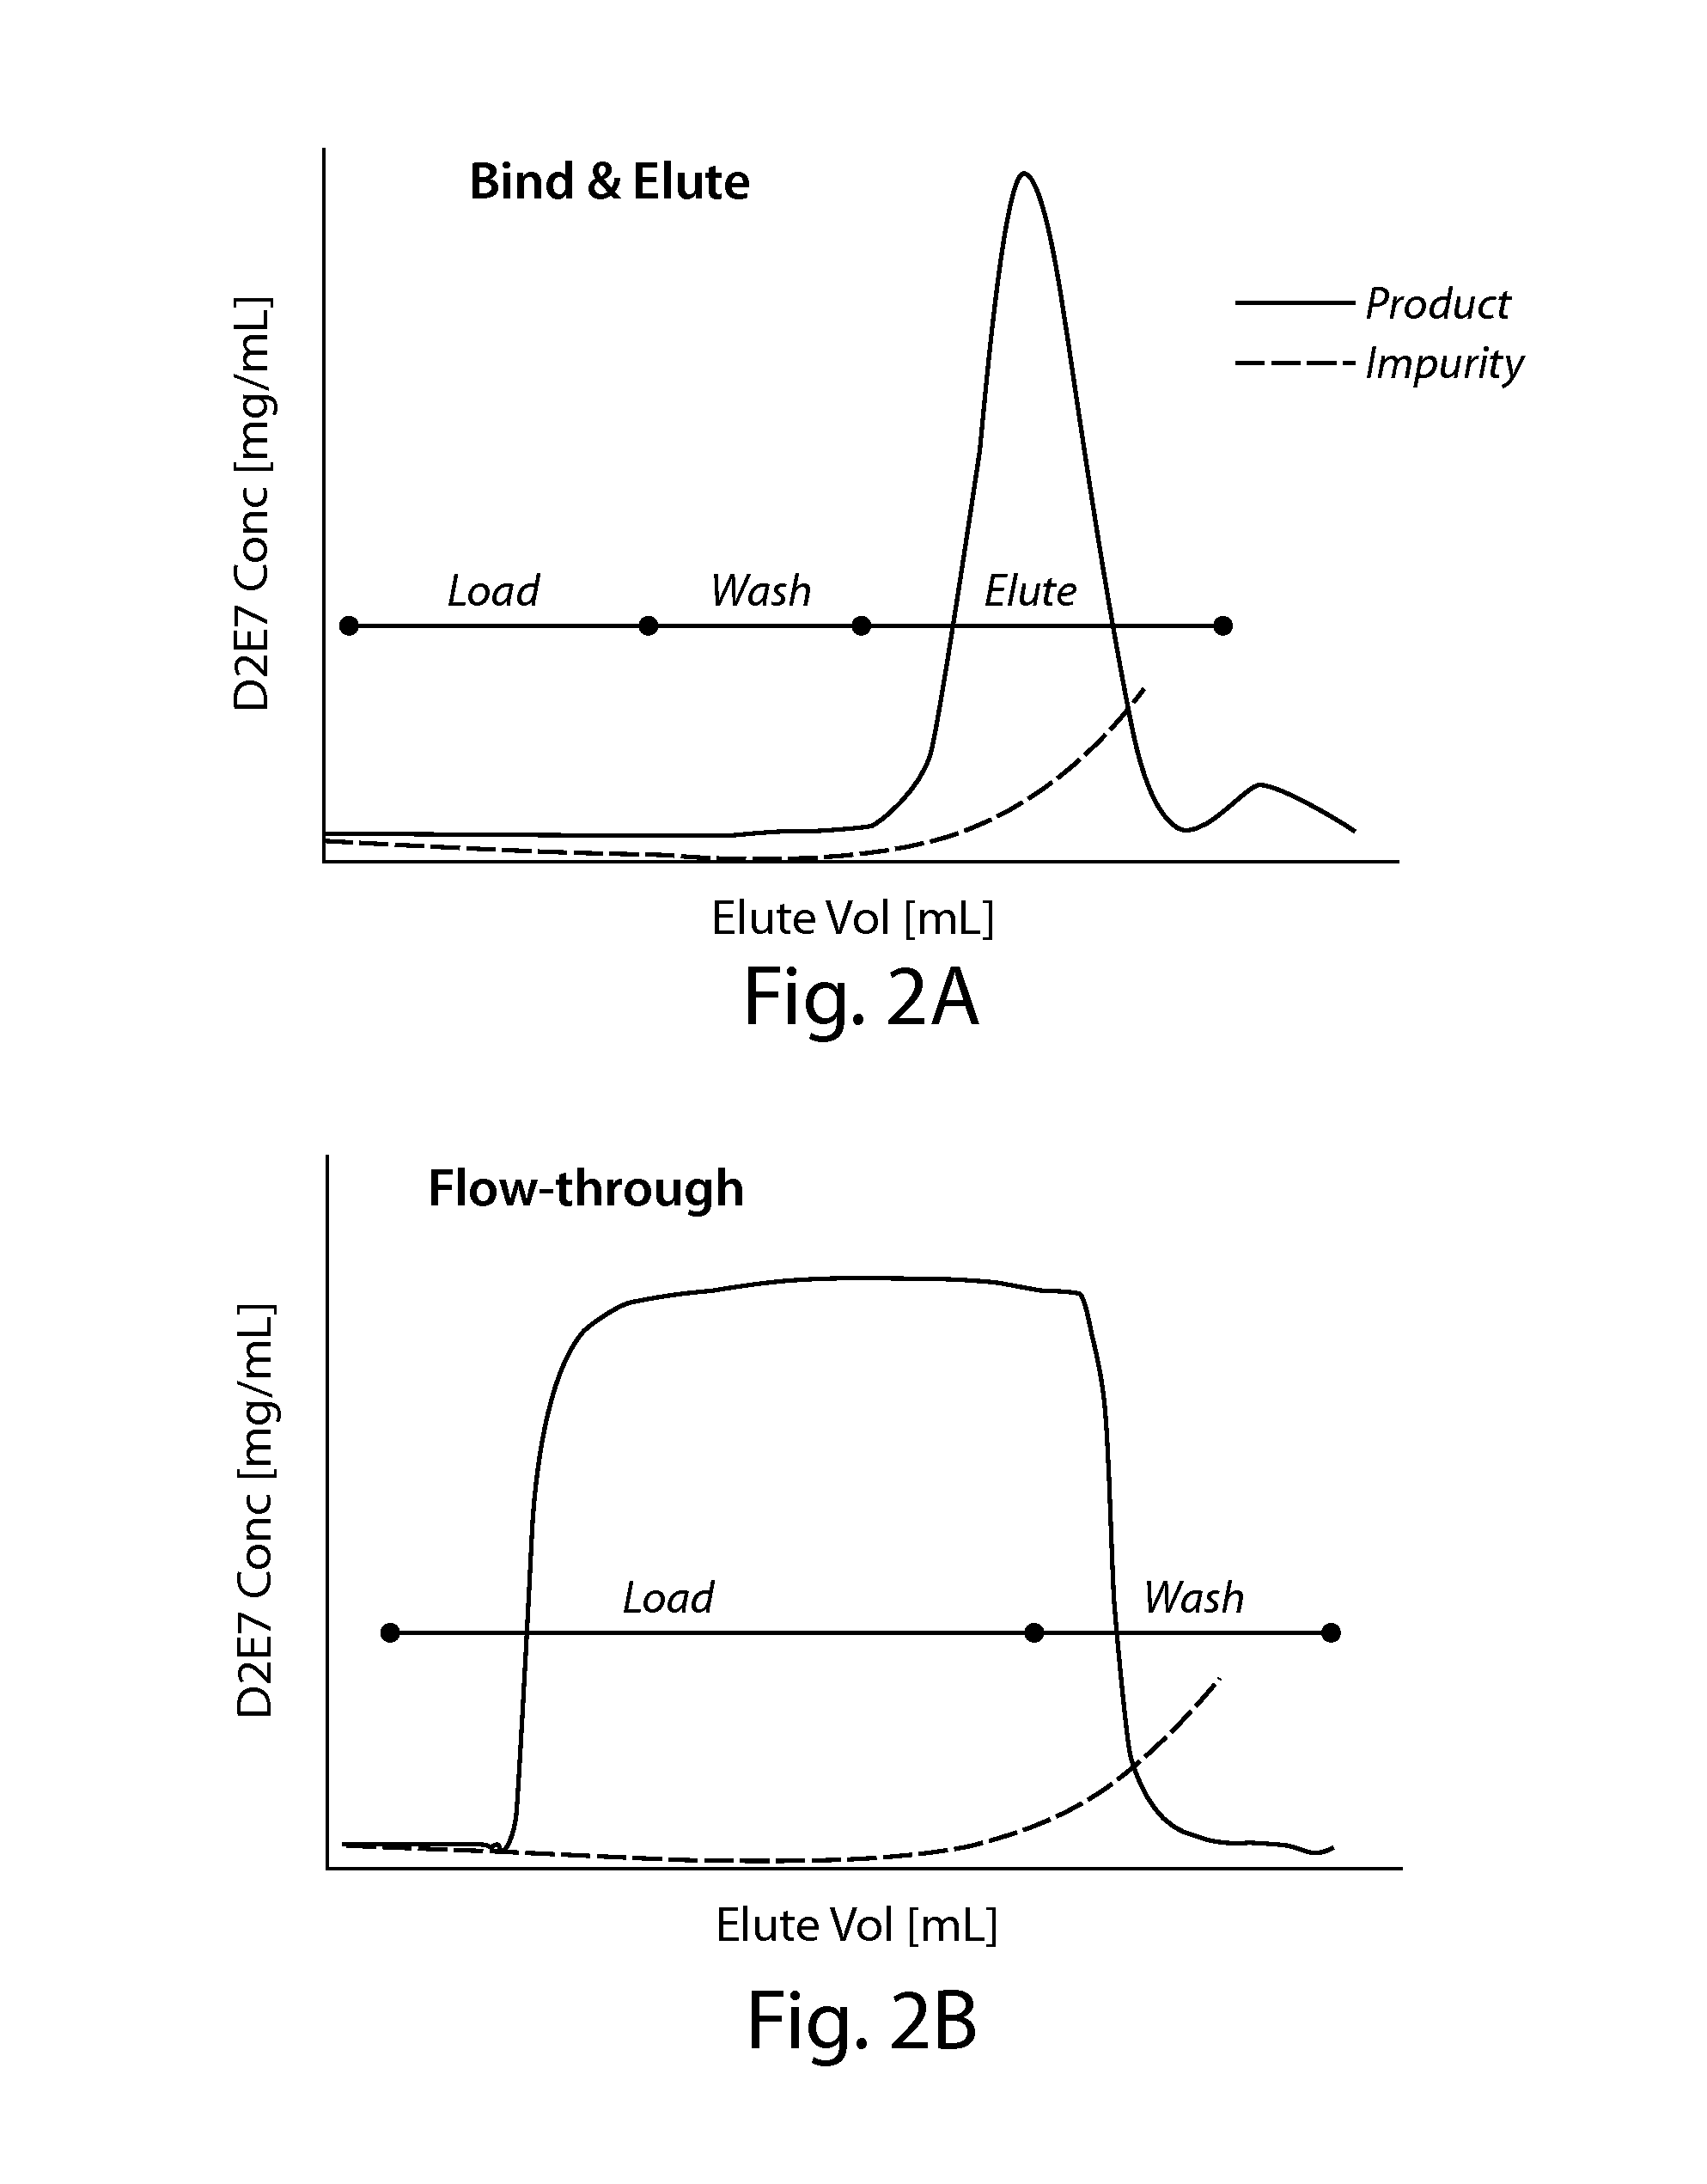 Purification of proteins using hydrophobic interaction chromatography